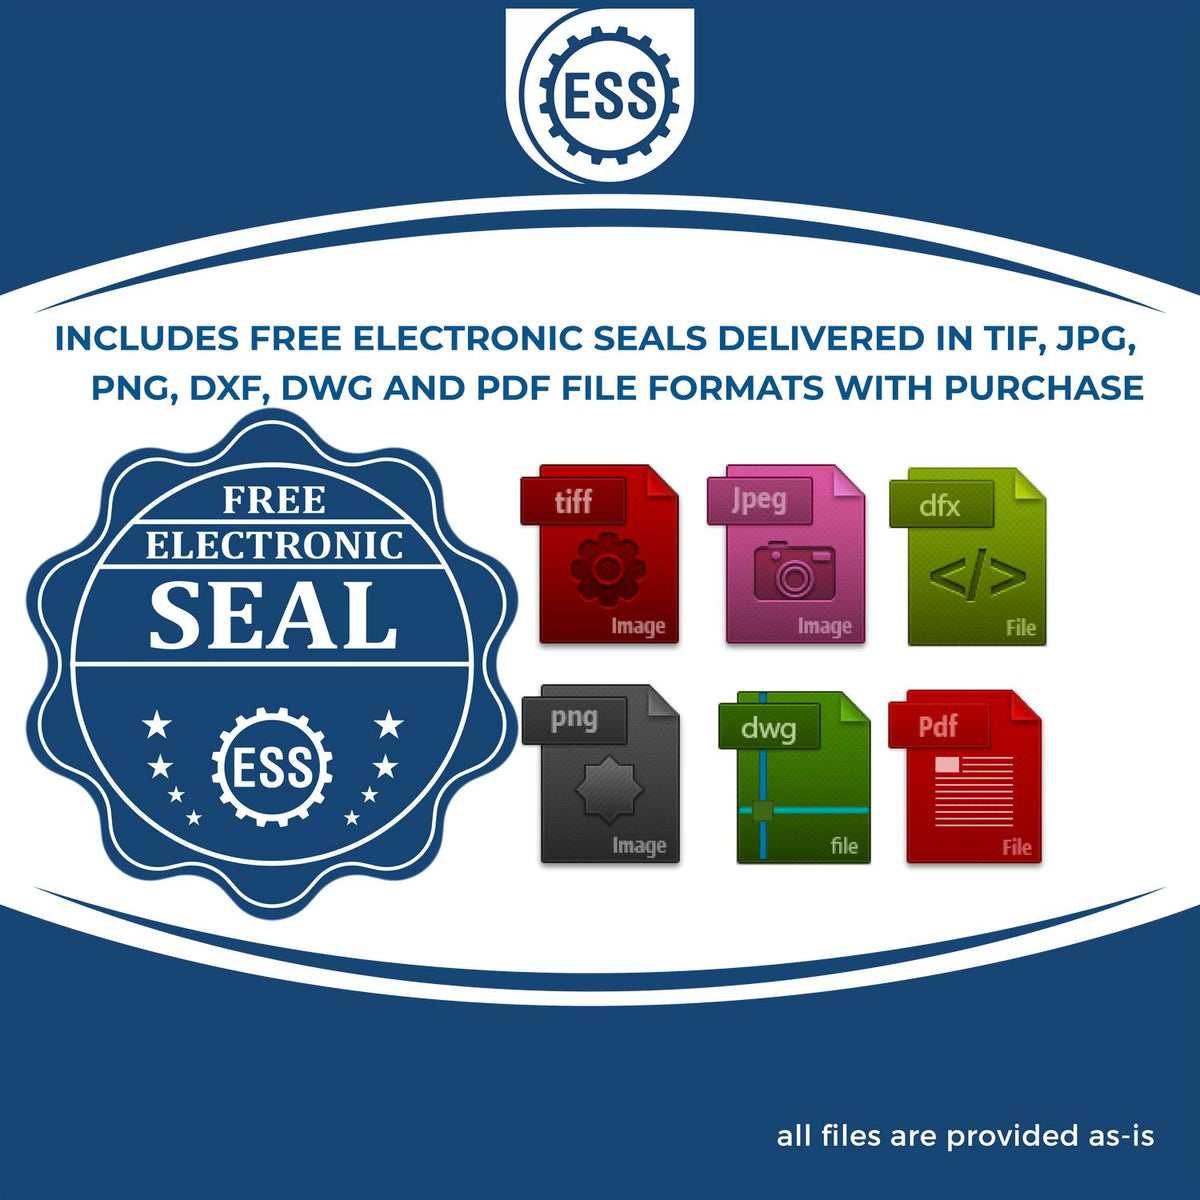 An infographic for the free electronic seal for the Premium MaxLight Pre-Inked Vermont Geology Stamp illustrating the different file type icons such as DXF, DWG, TIF, JPG and PNG.